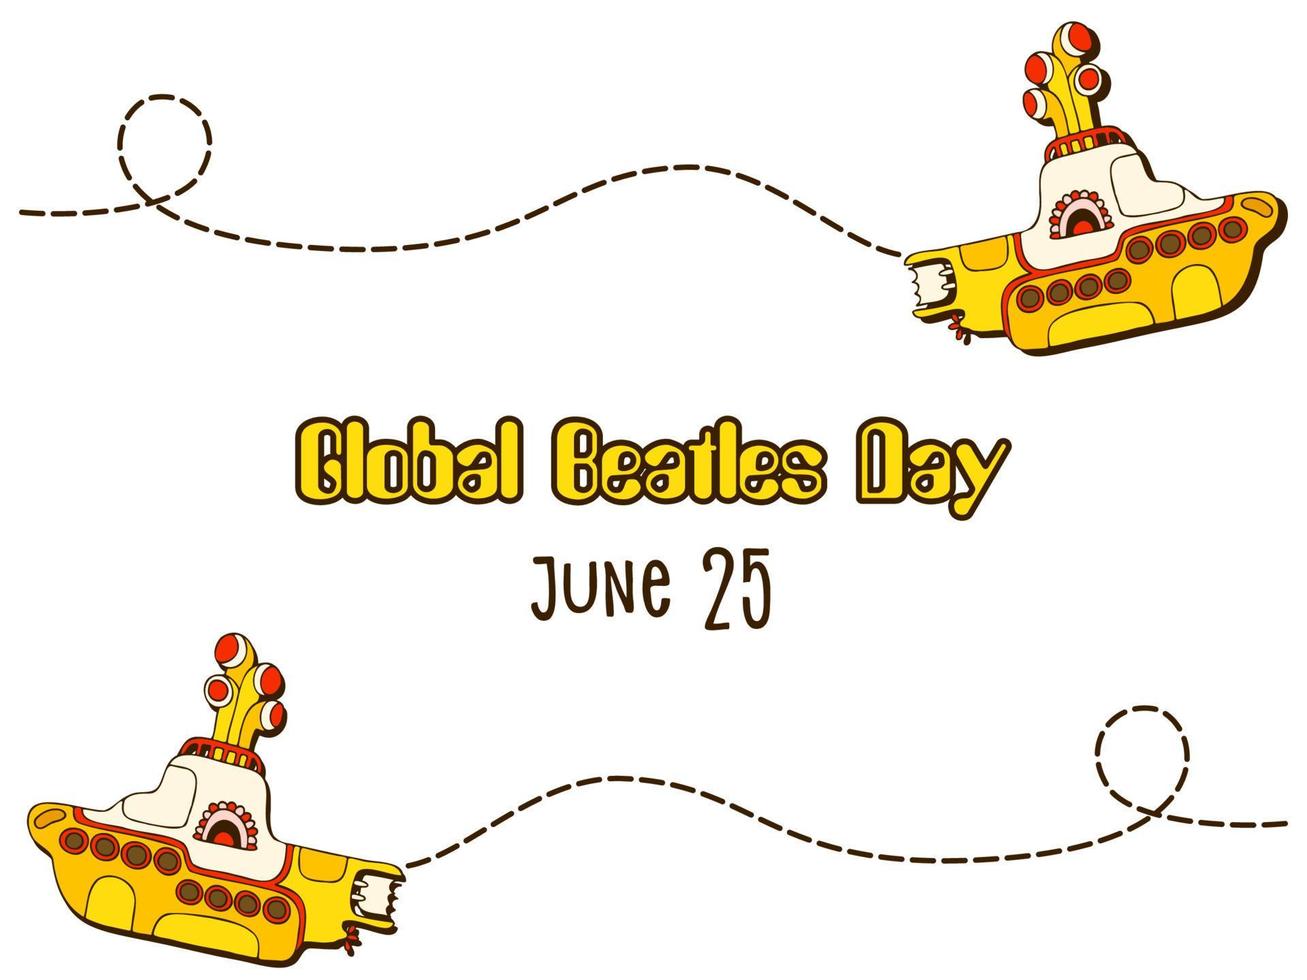 Yellow submarine in doodle style. Hand drawn logo. Global Beatles Day - June 25. vector